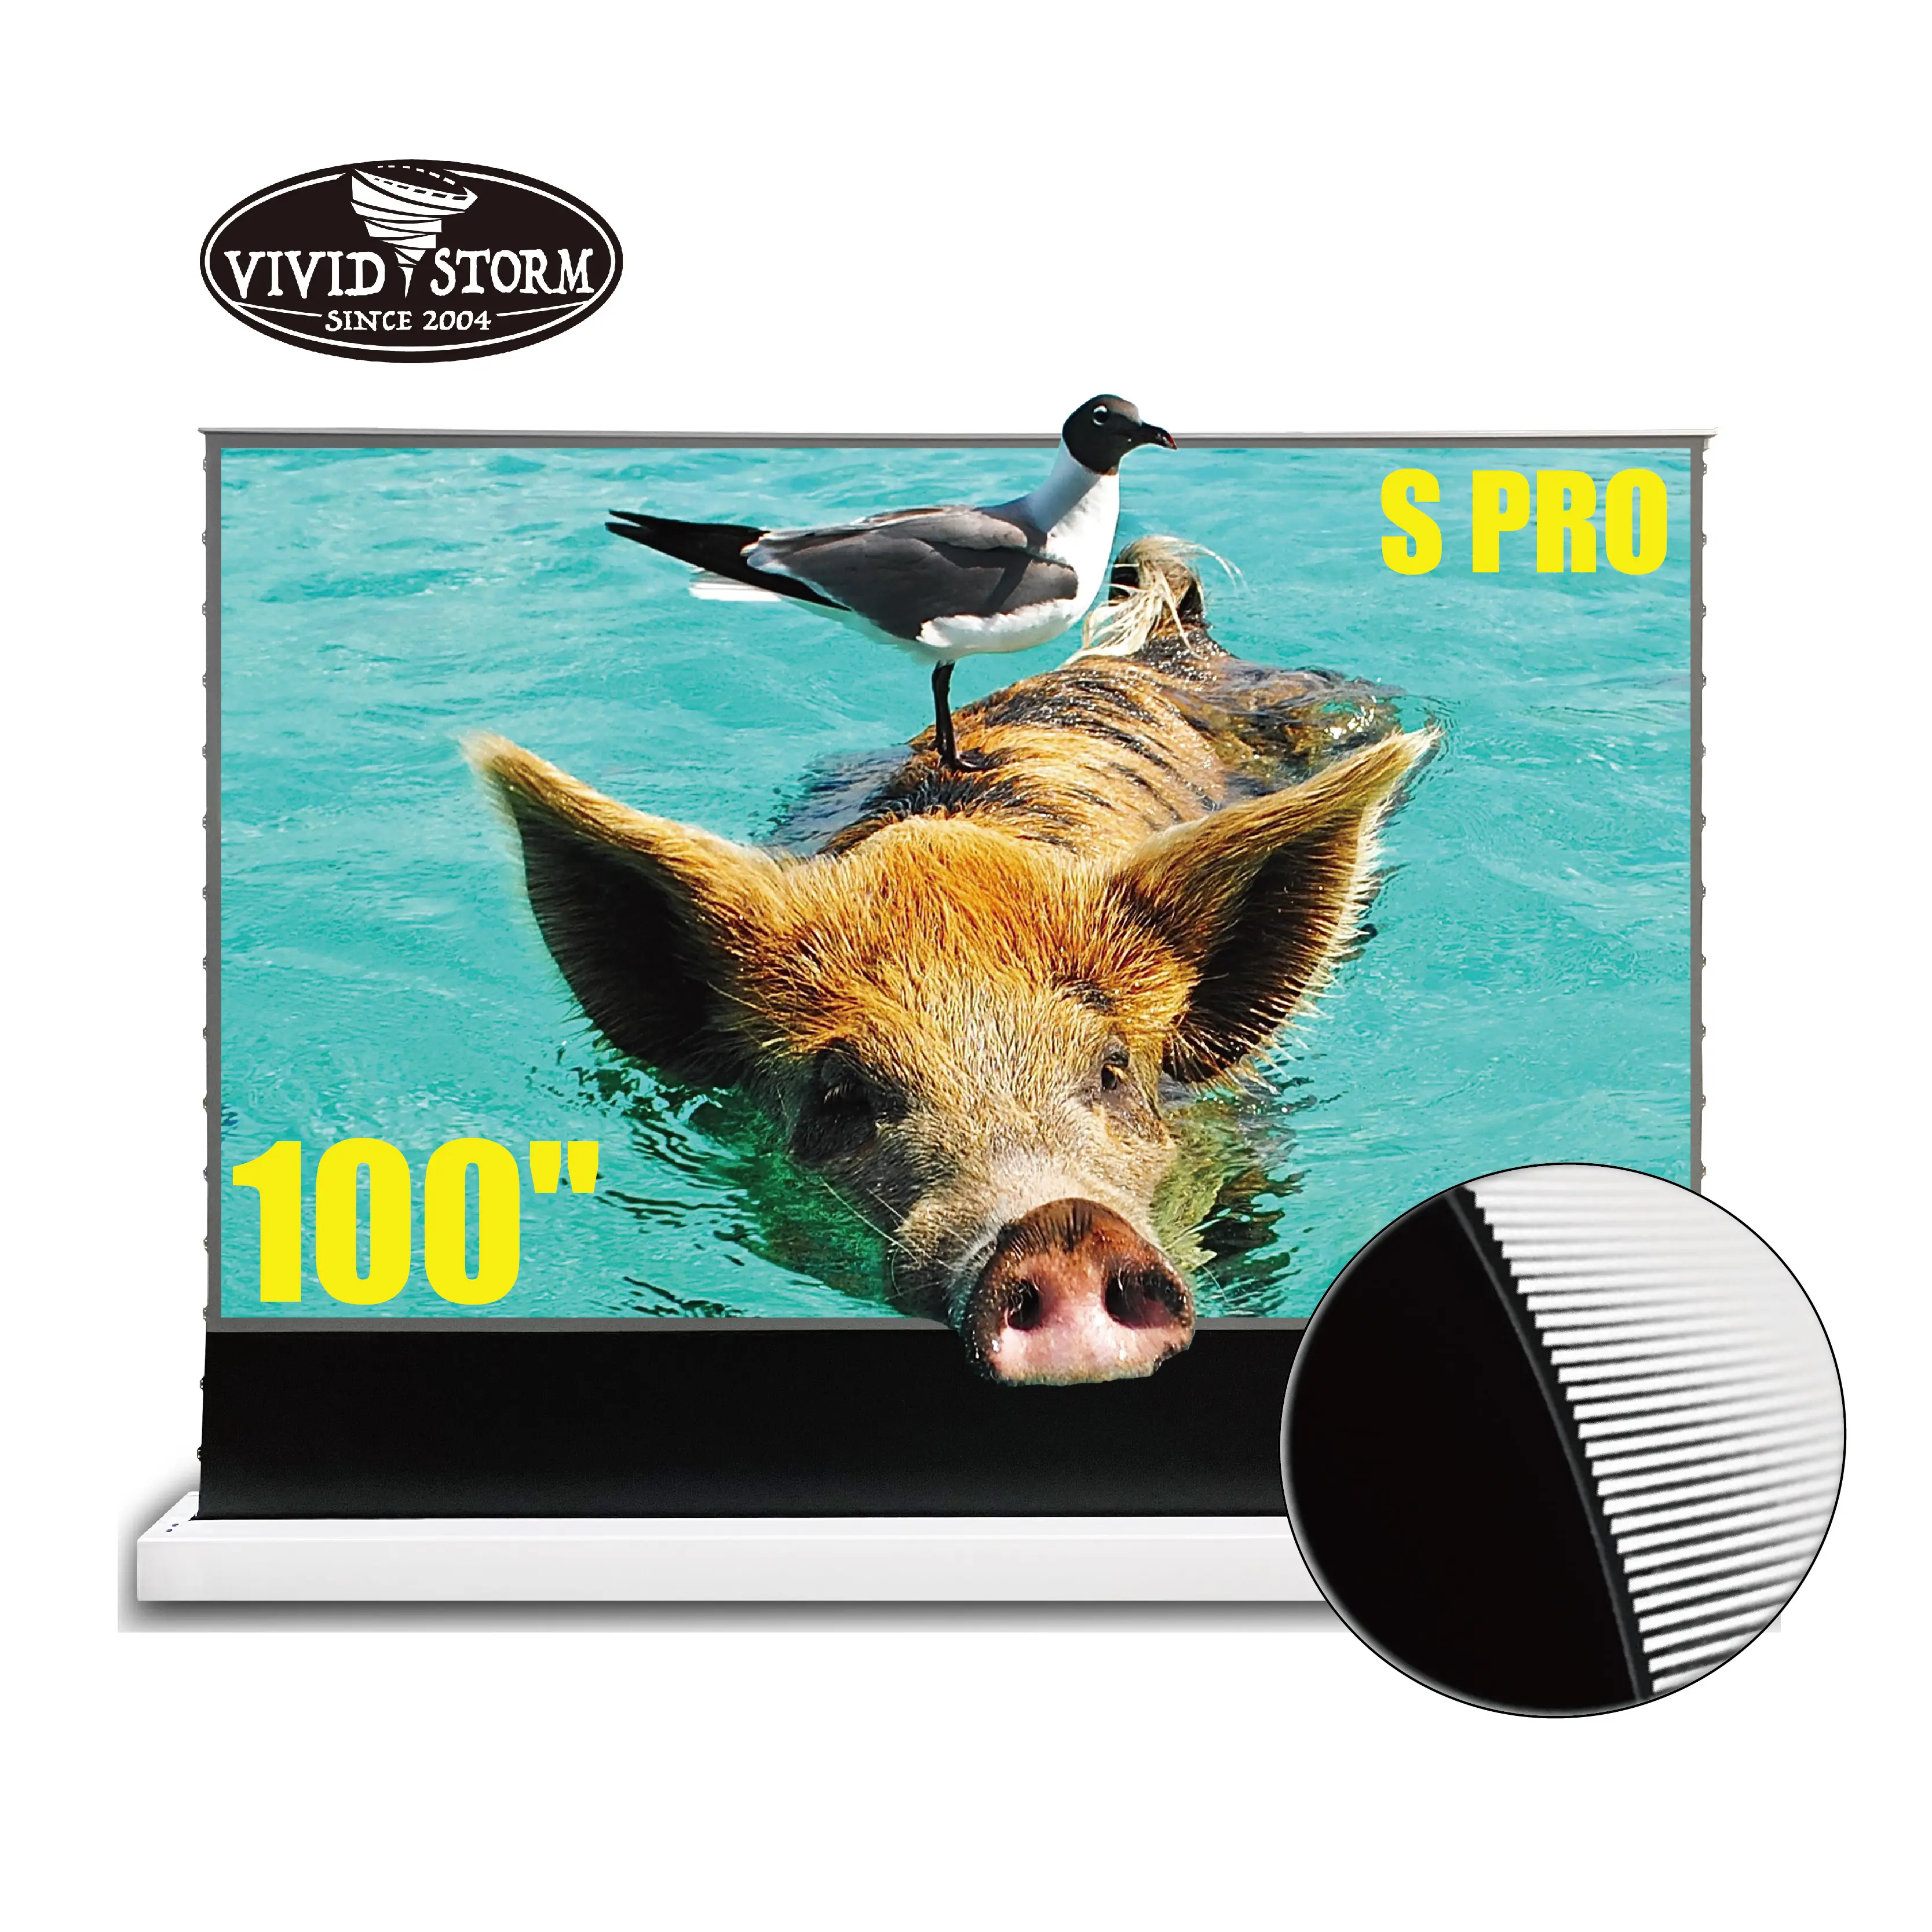 VIVID STORM S PRO 100 Zoll CLR Rolla ble Projector Screen mit Stand Electric Tension Floor Filmleinwand UST Laser TV